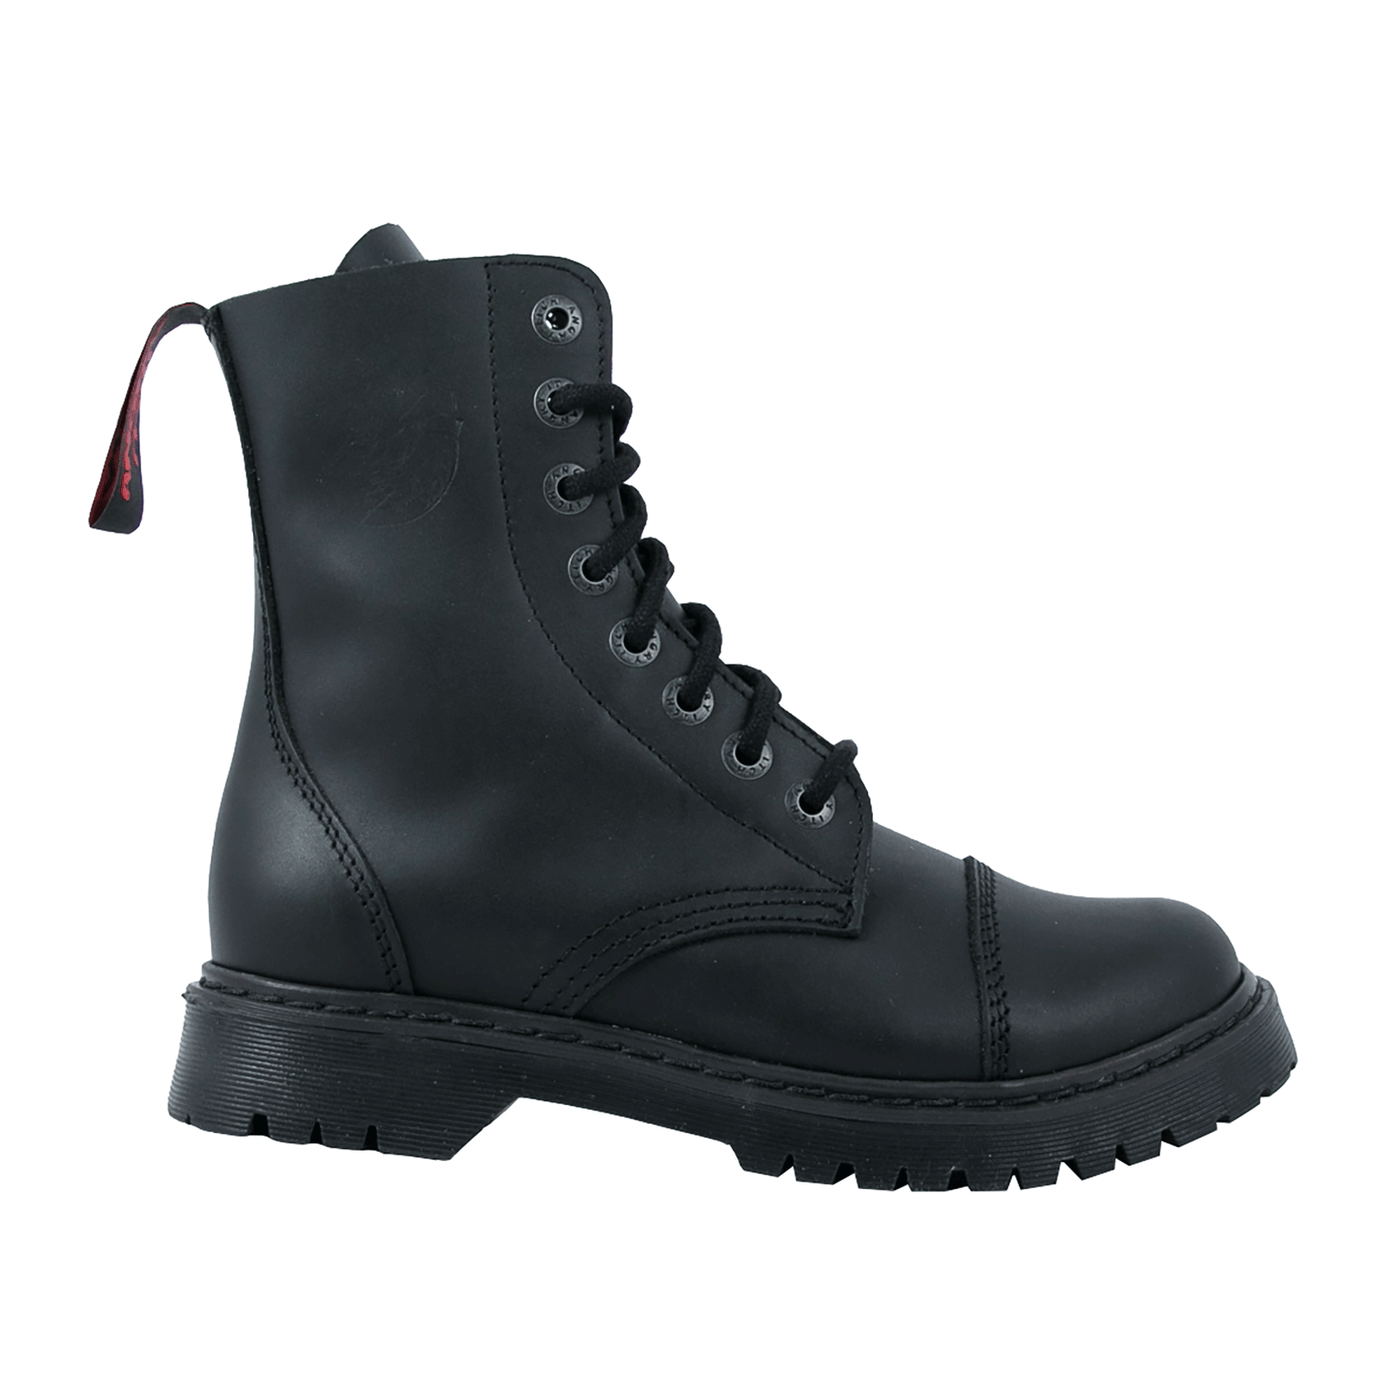 Angry Itch 8 Eyelet Combat Boots Black Leather Light Air Cushion Sole